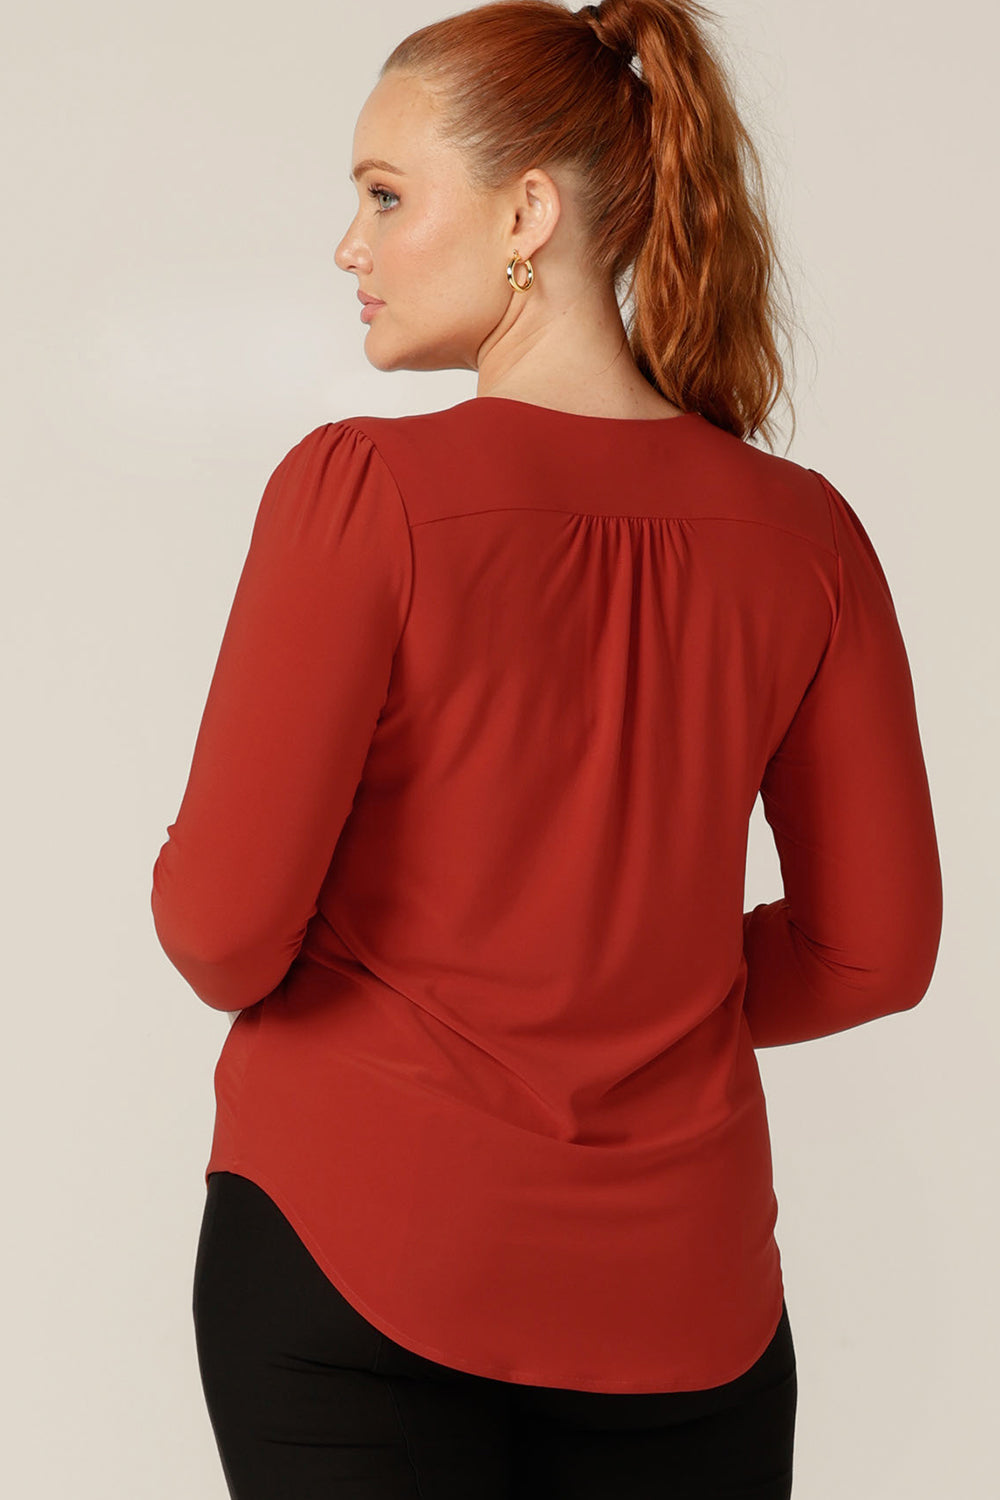 Back view of Auatralian and New Zealand women's clothing label, L&F's newest workwear top.  A good top for petite to fuller figure women, this V-neck jersey top has long sleeves. In orange dry-touch jersey, this comfortable top is good for revitalising corporate suits and trousers..